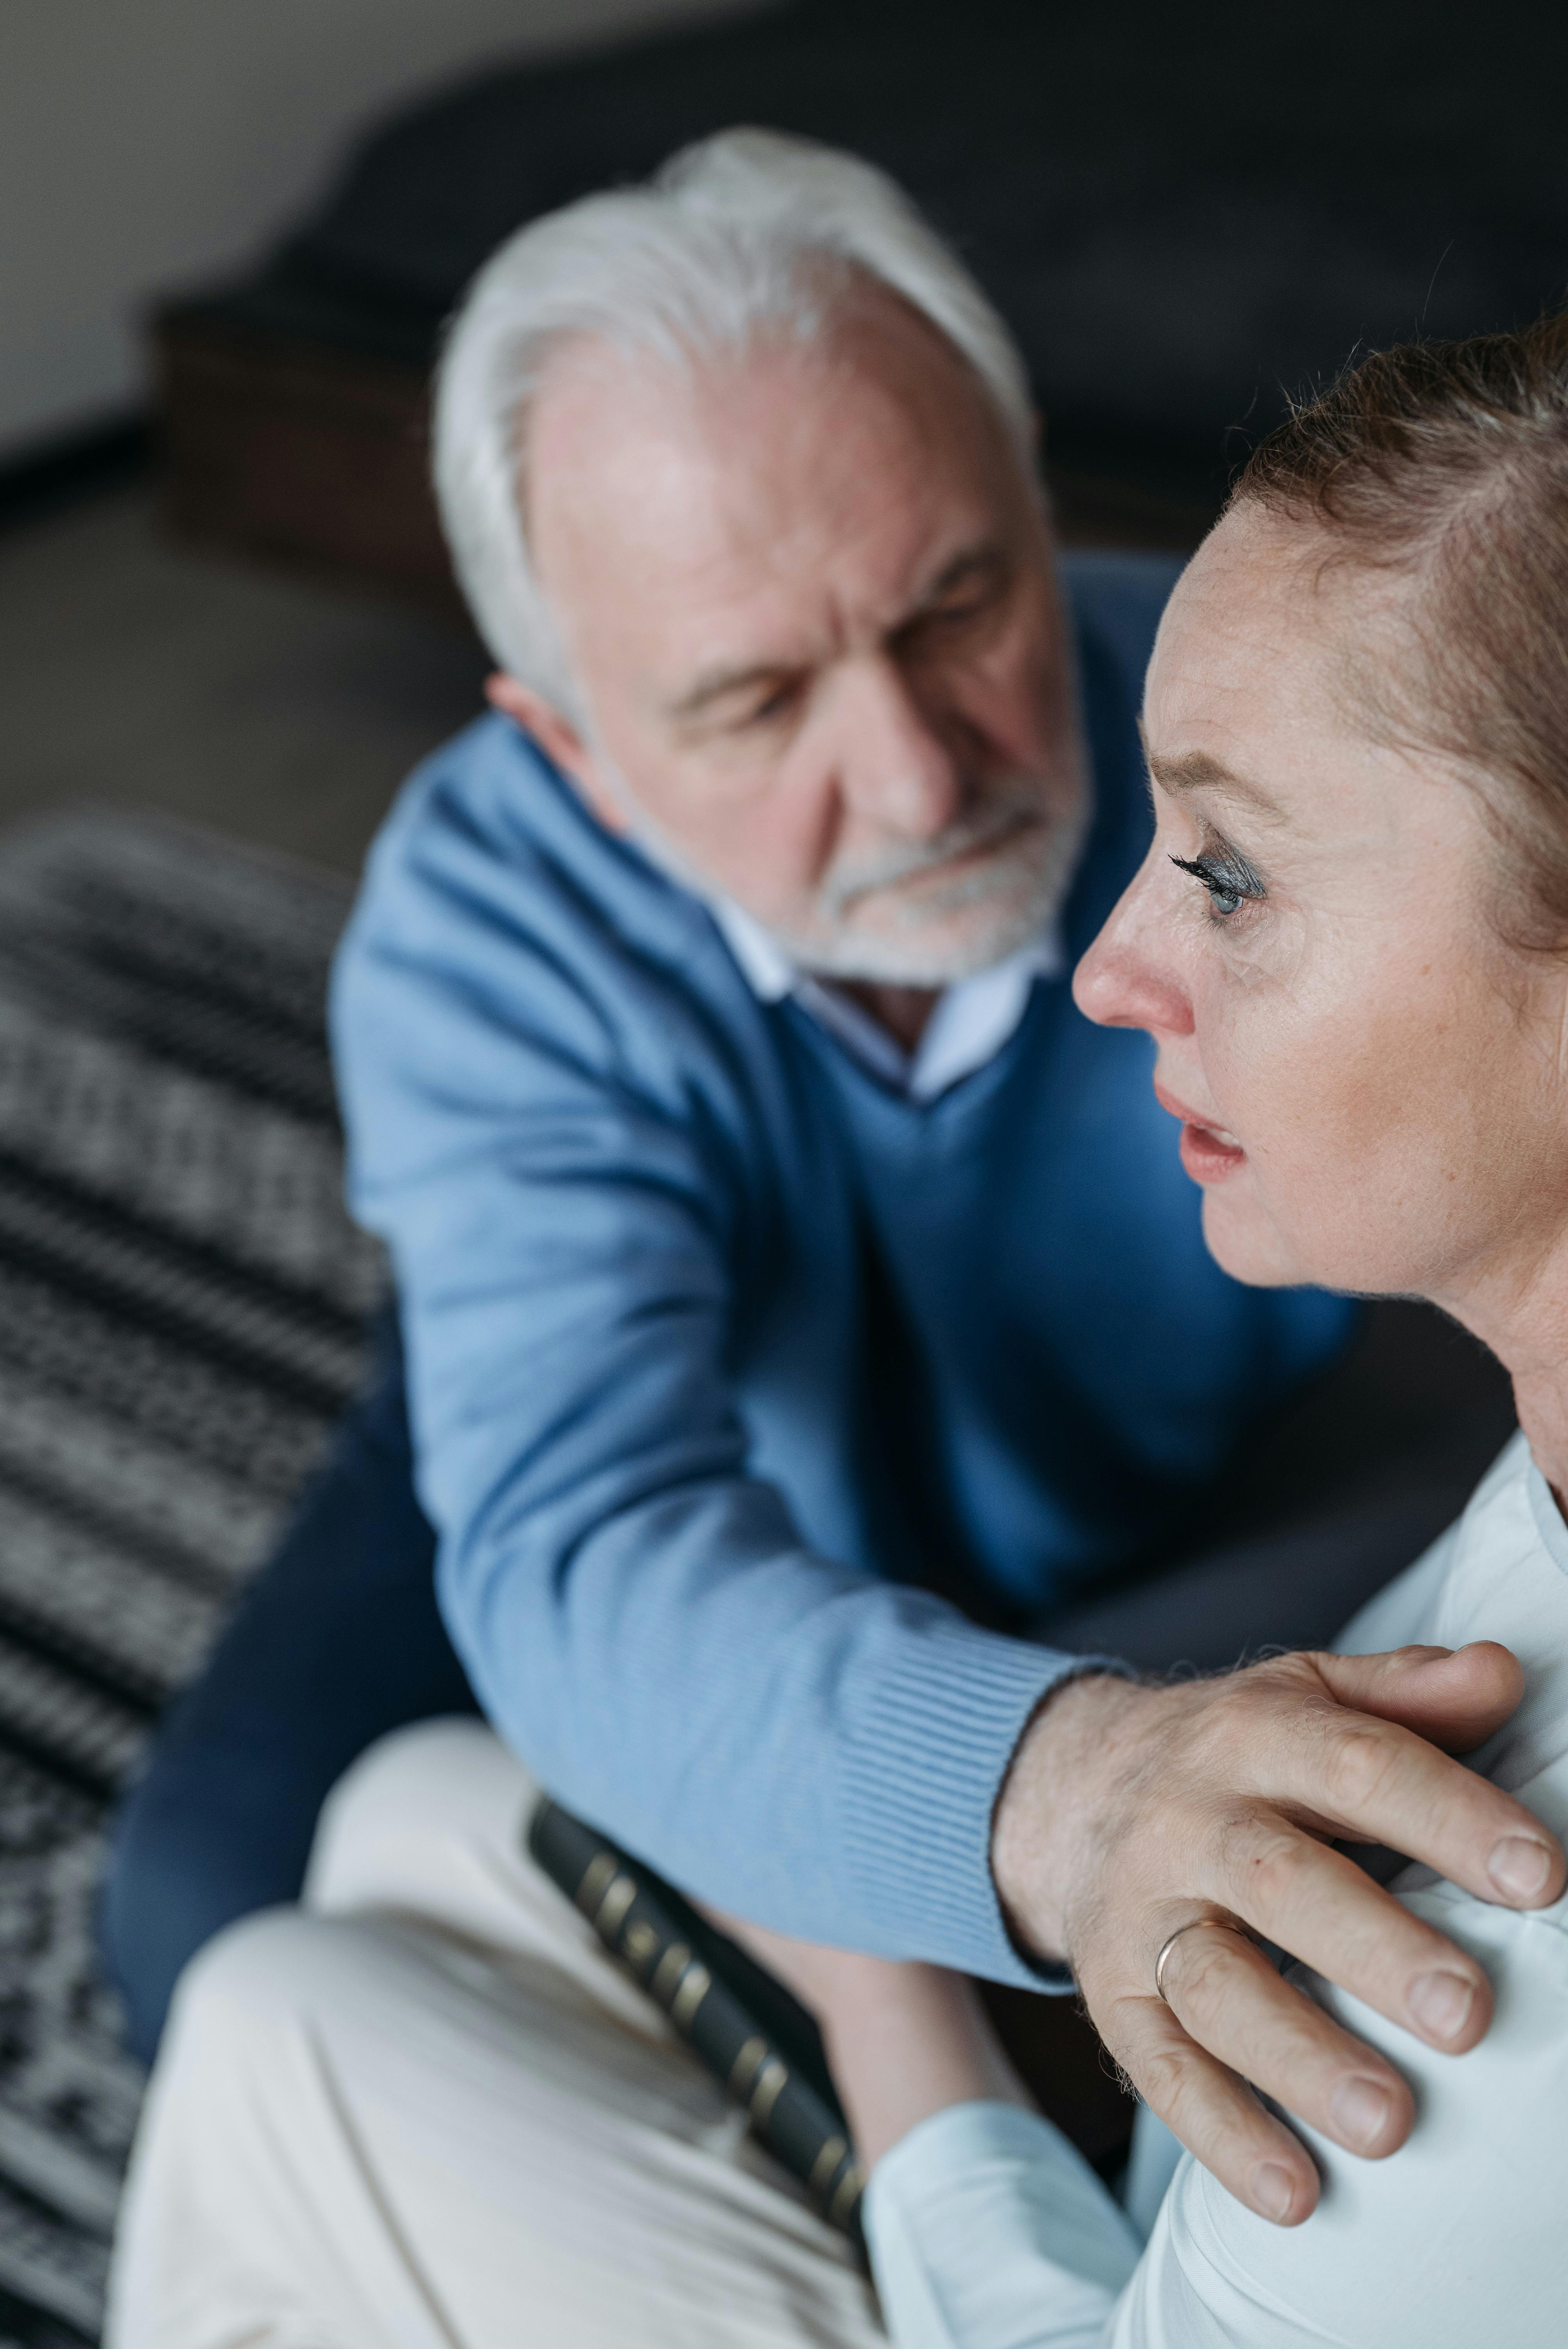 An upset senior woman being comforted by her husband | Source: Pexels